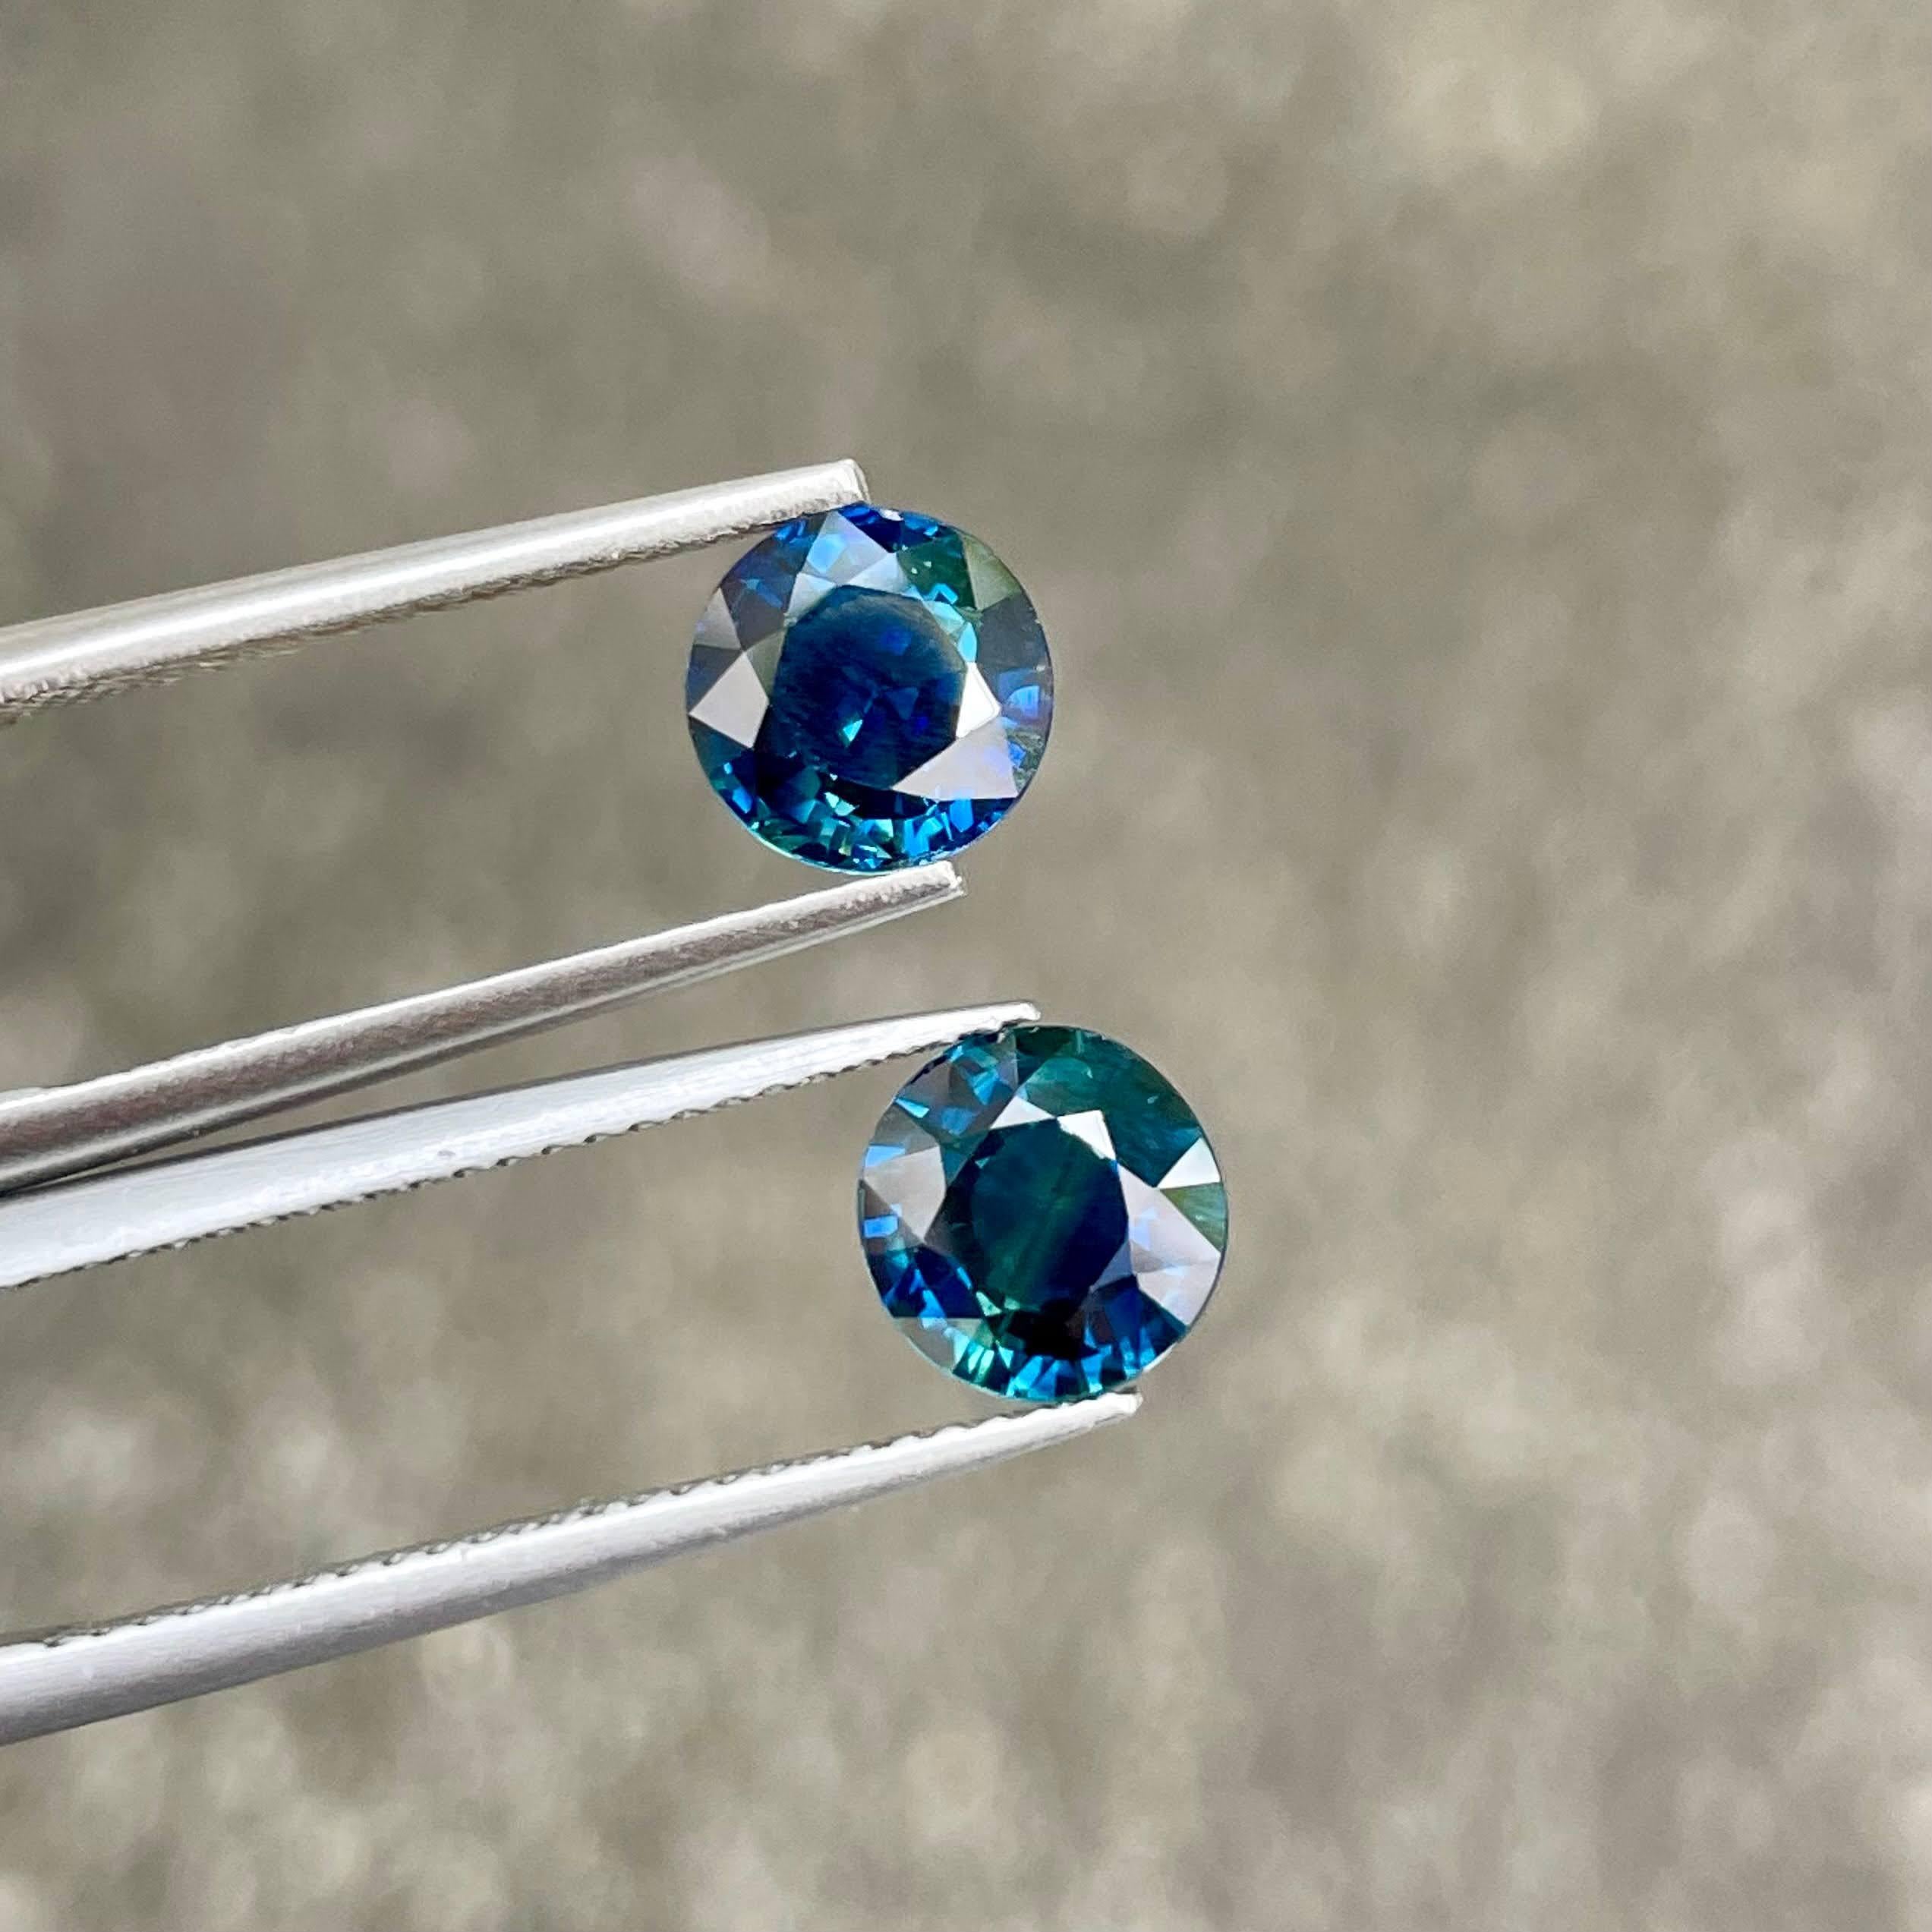 Weight 3.19 carats 
Dimensions 7.0x4.0 mm
Treatment Heated 
Clarity VVS
Origin Madagascar 
Shape round 
Cut round brilliant 




Behold the mesmerizing beauty of a 3.19 carat pair of Teal Blue Sapphires, impeccably crafted in a Round Cut to showcase